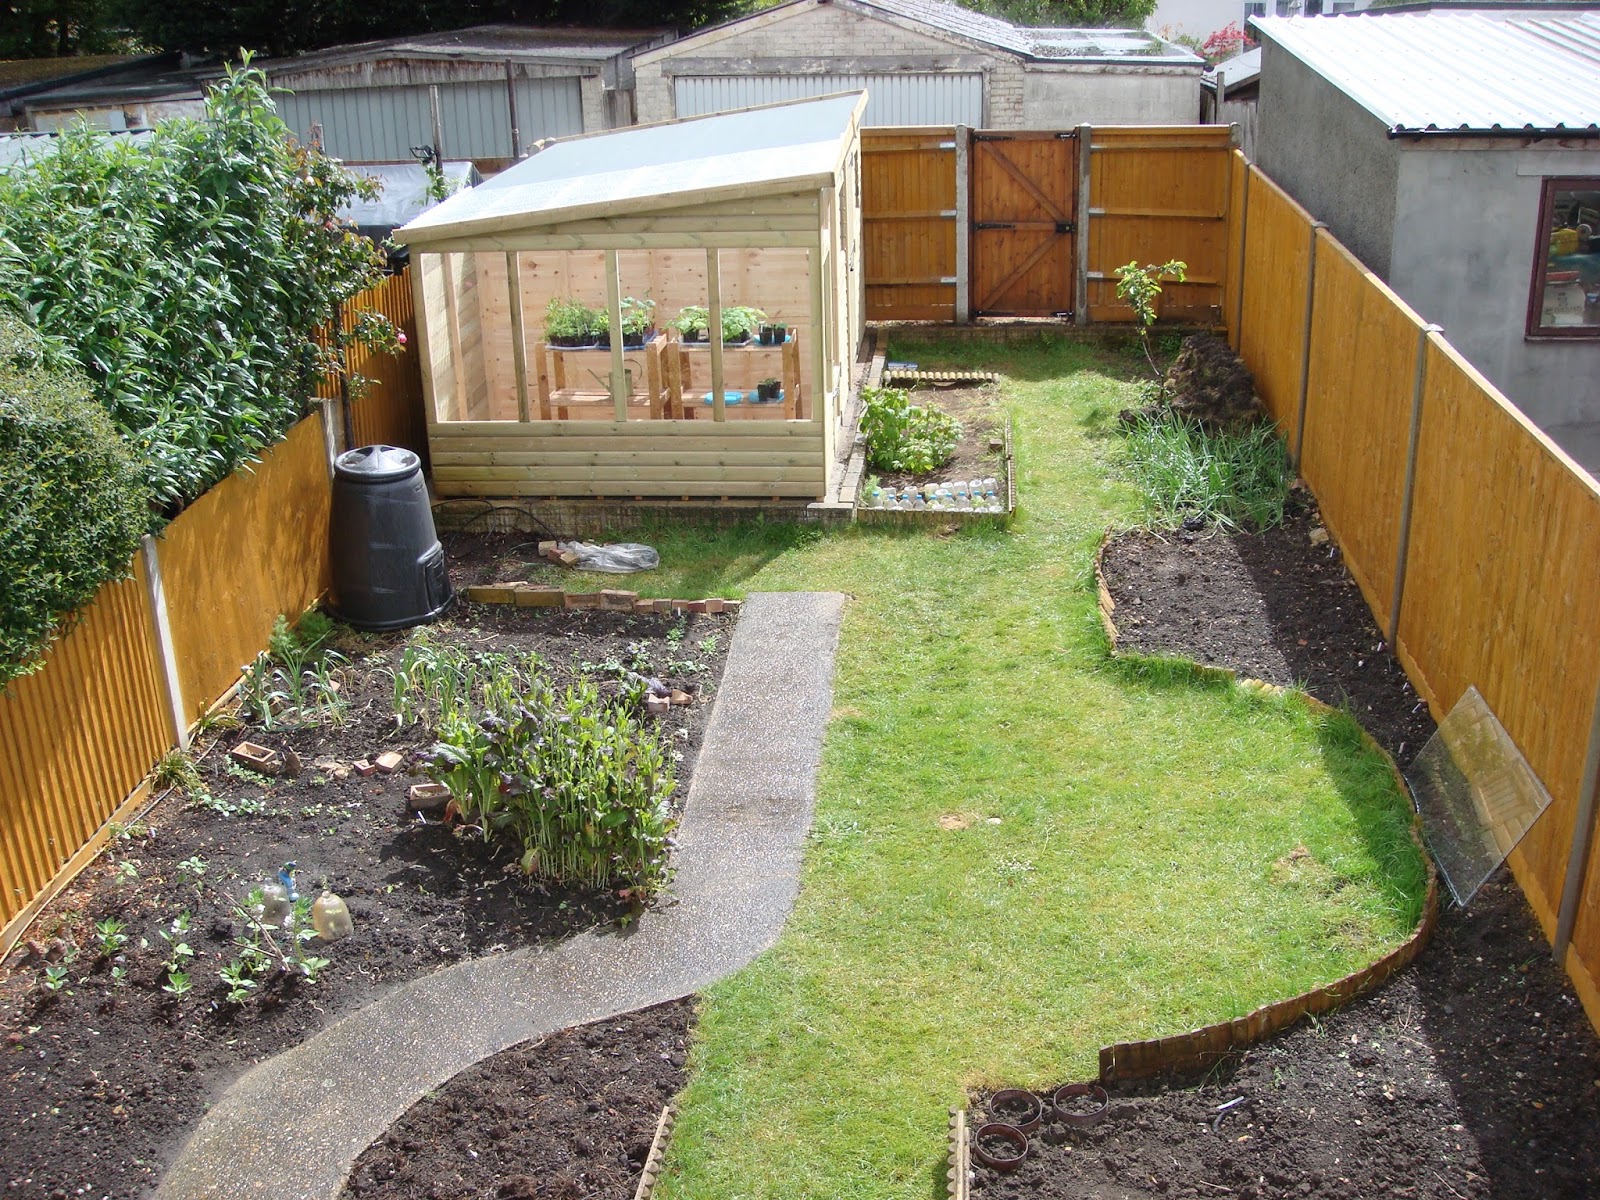 Veg patch from scratch: The new shed/greenhouse combo has 